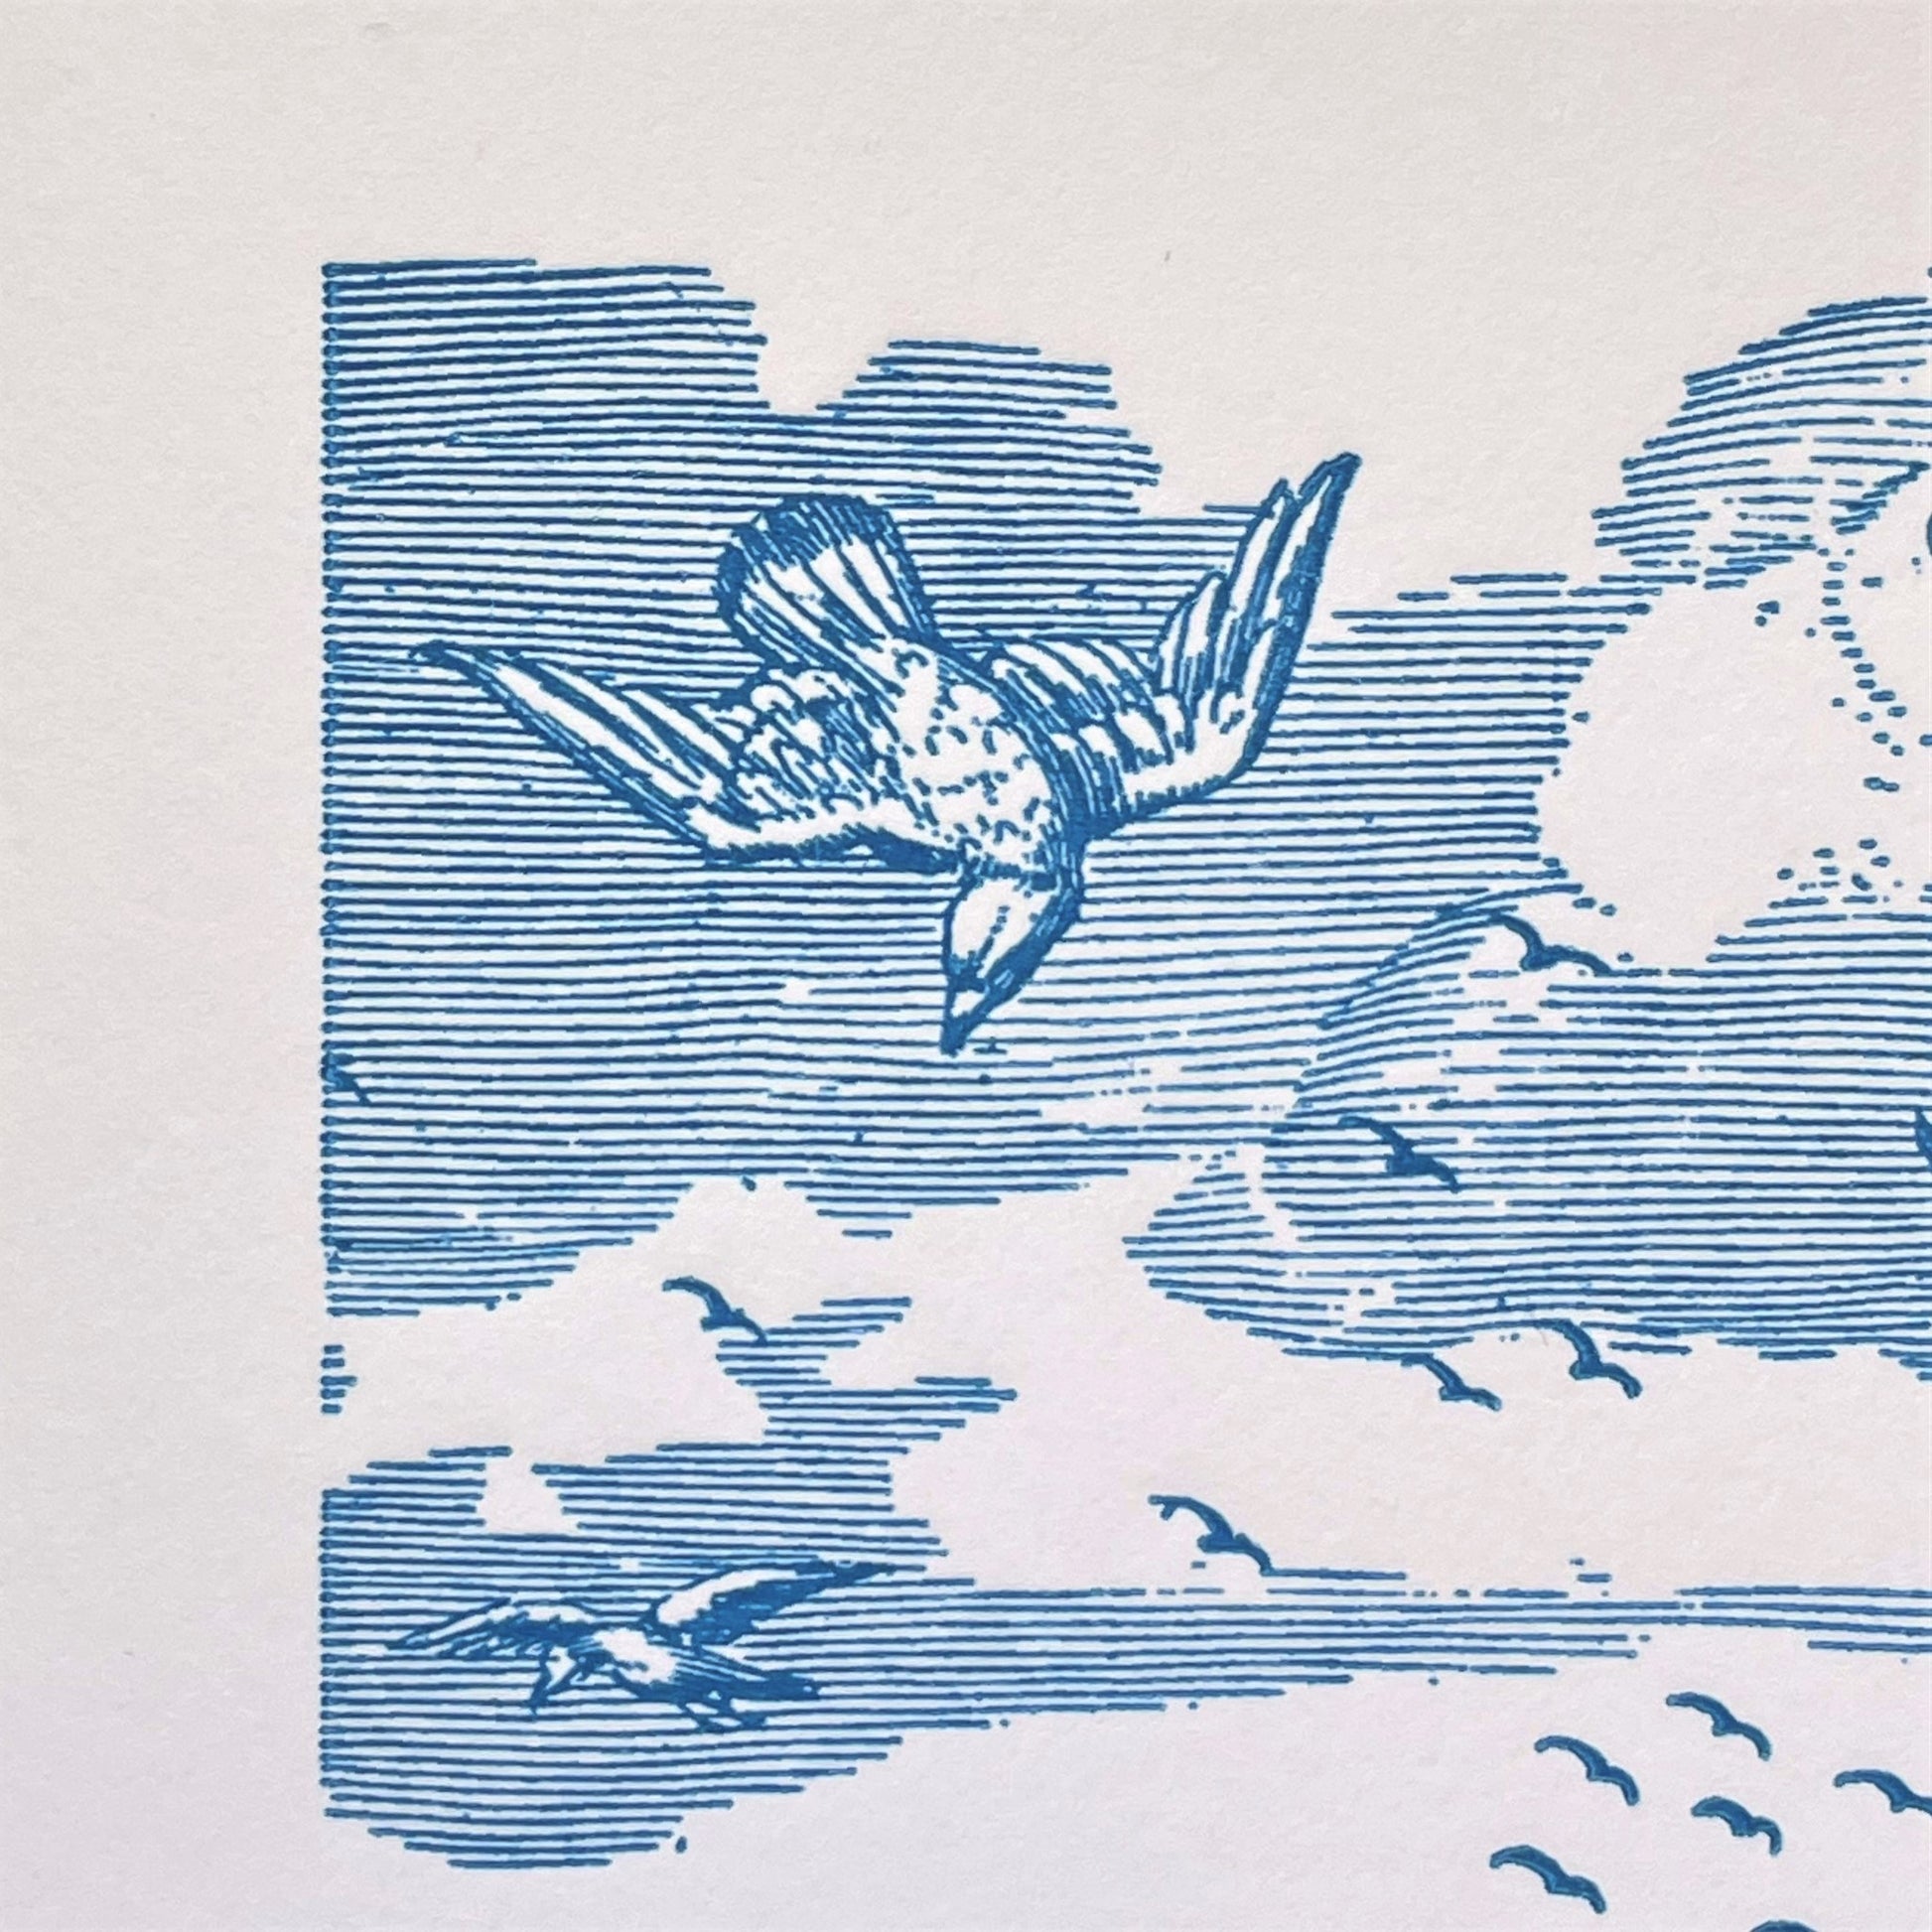 letterpress greetings card of a drawing of birds flying over the bass rock, blue ink on white, close-up